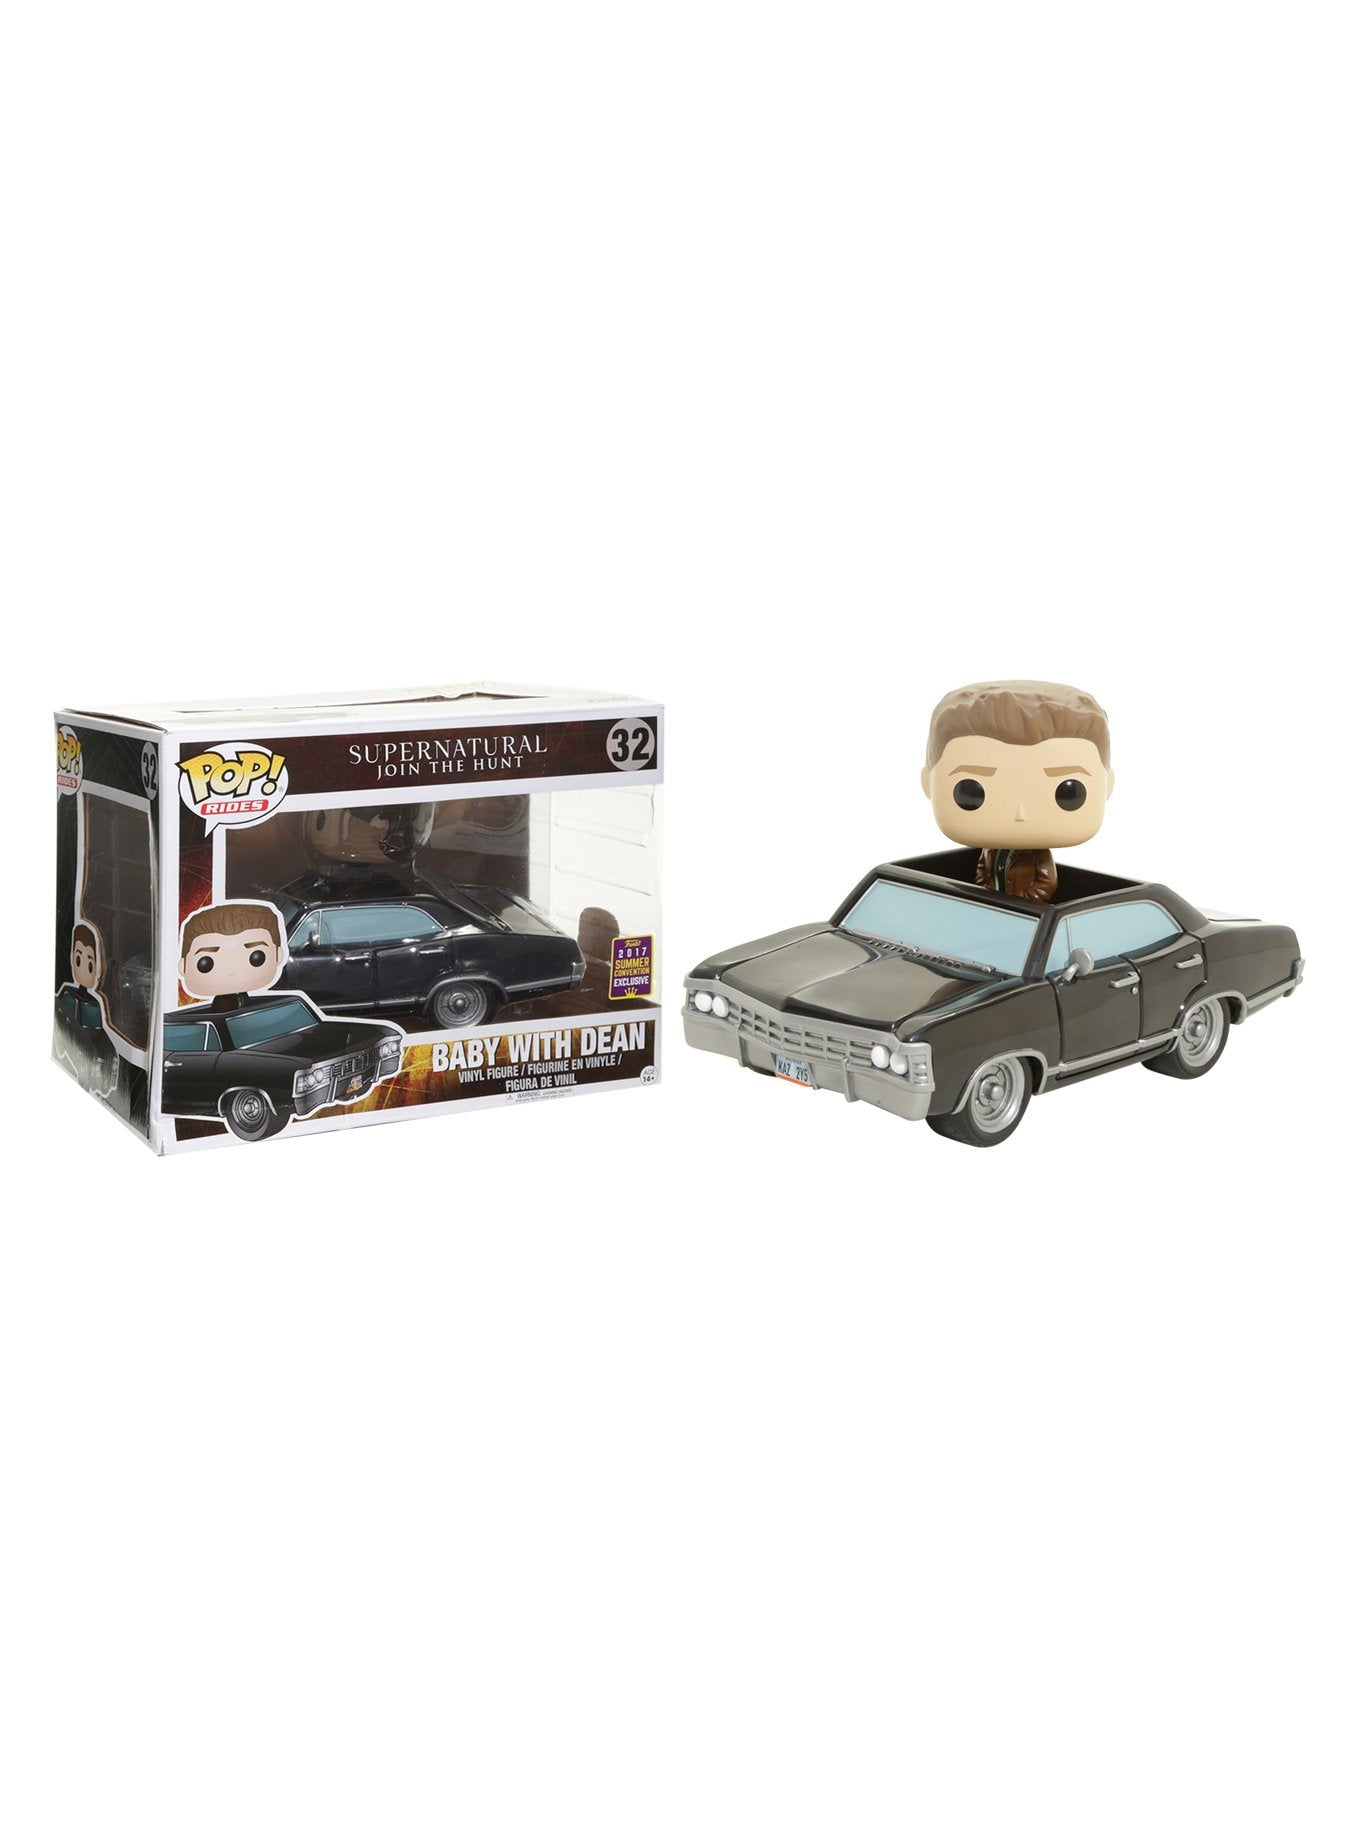 Funko POP! Rides Supernatural Baby With Dean SDCC 2017